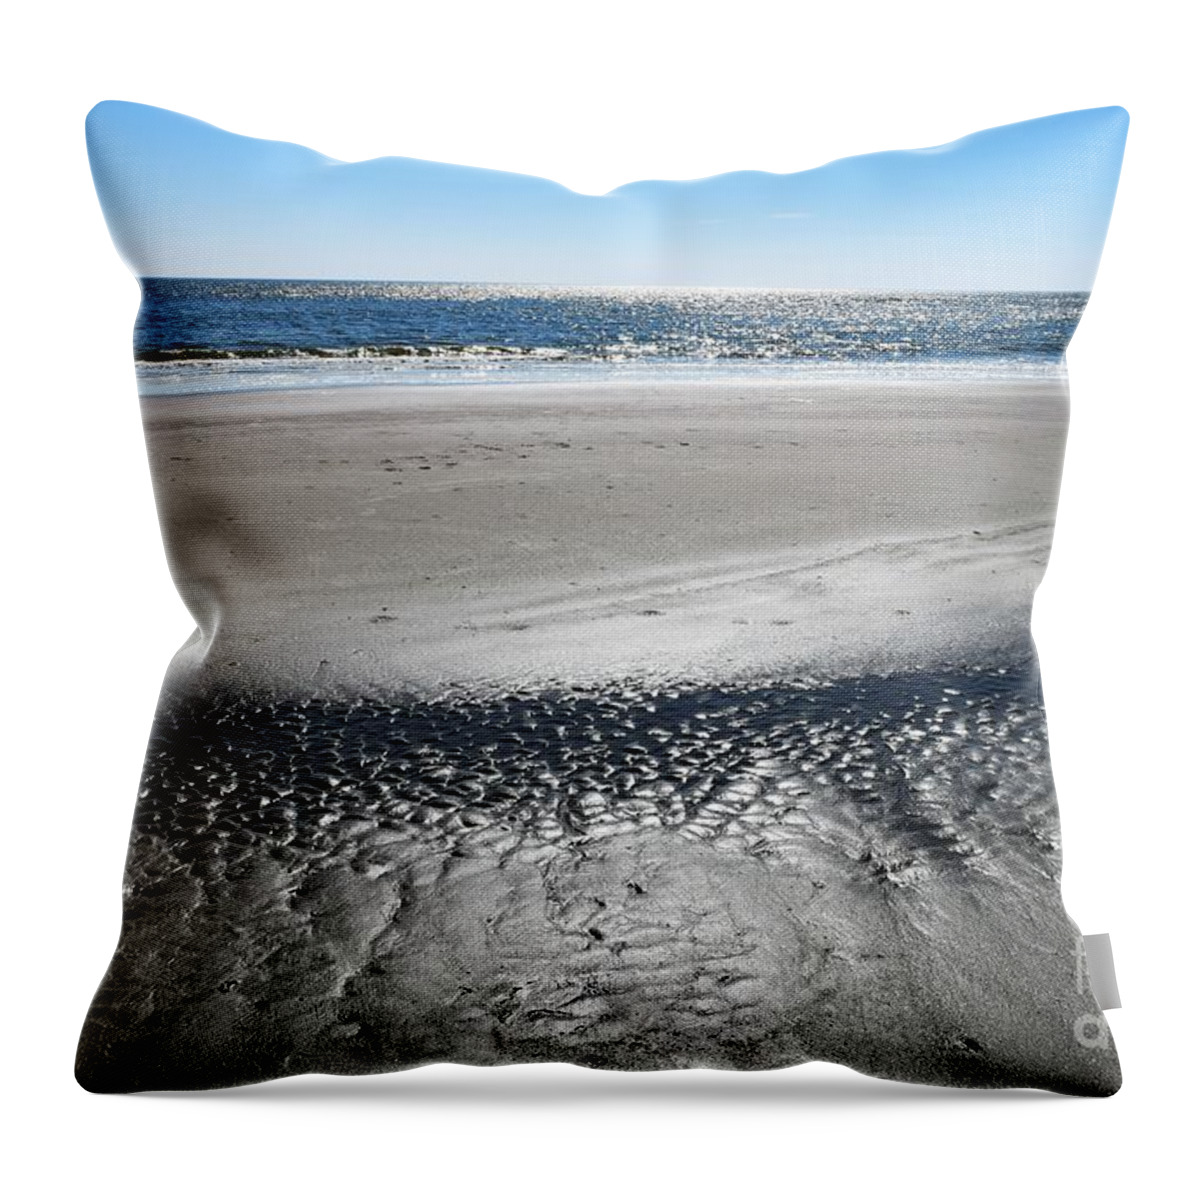  Throw Pillow featuring the photograph Low Tide Sunset by Victor Thomason